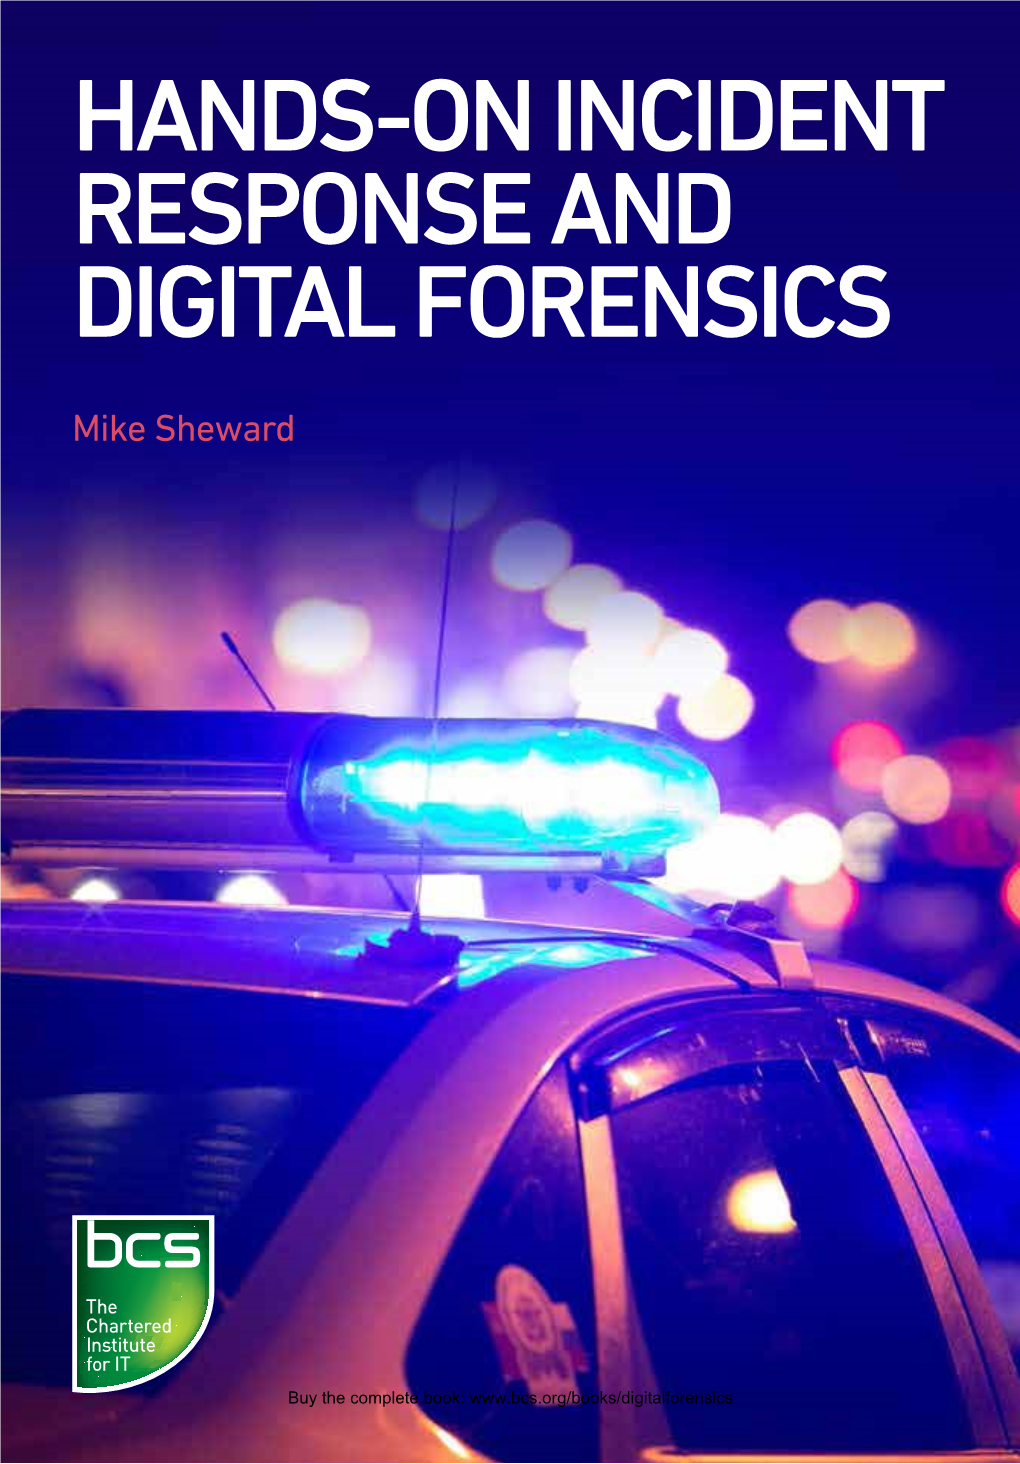 Buy the Complete Book: Buy the Complete Book: HANDS-ON INCIDENT RESPONSE and DIGITAL FORENSICS